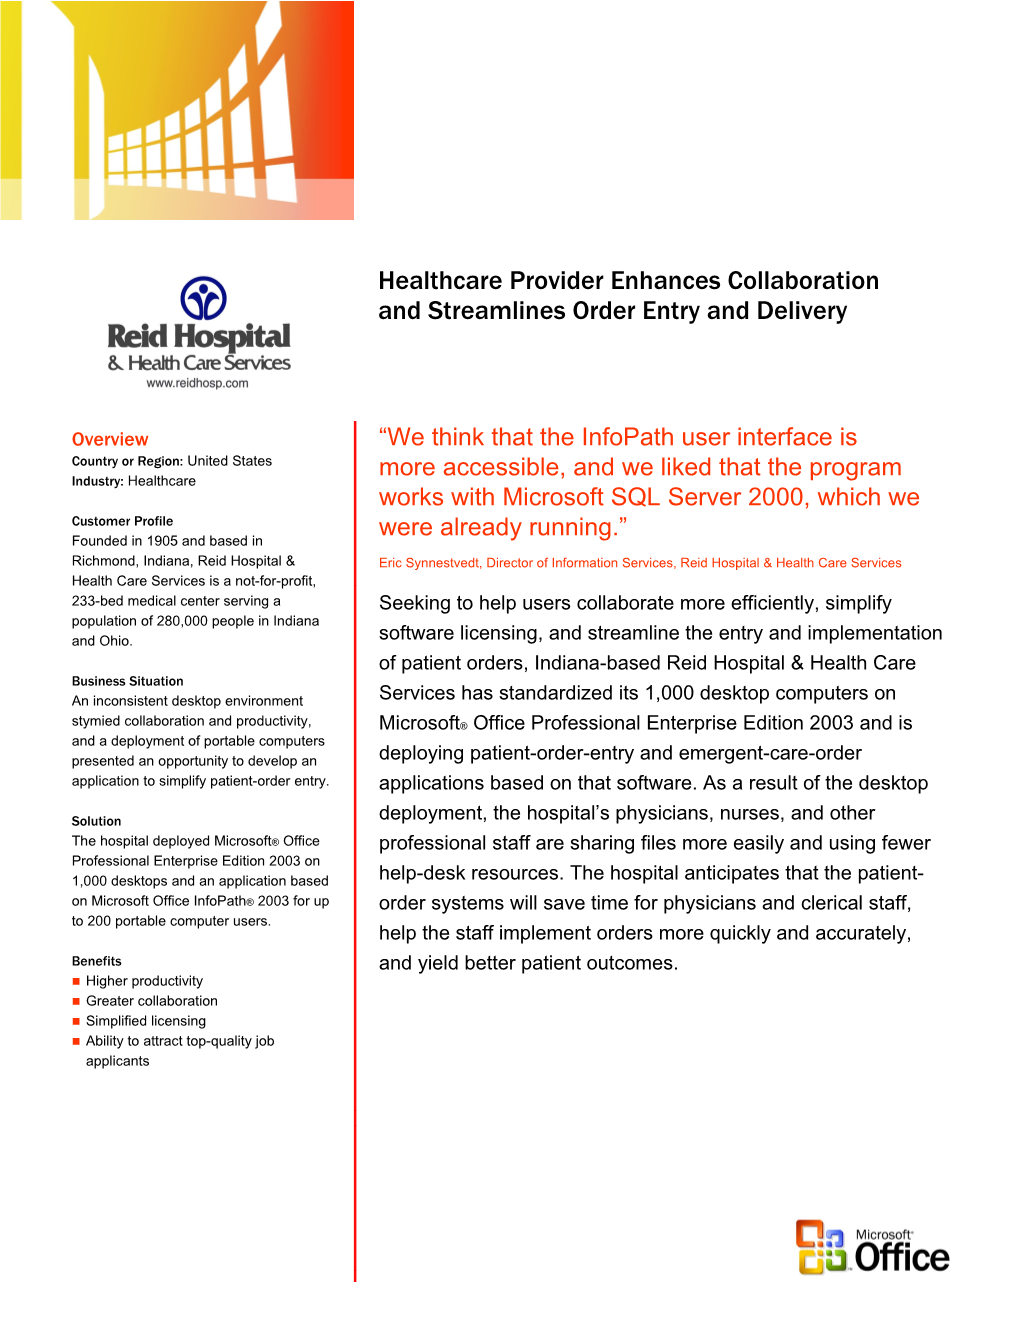 Healthcare Provider Enhances Collaboration and Streamlines Order Entry and Delivery